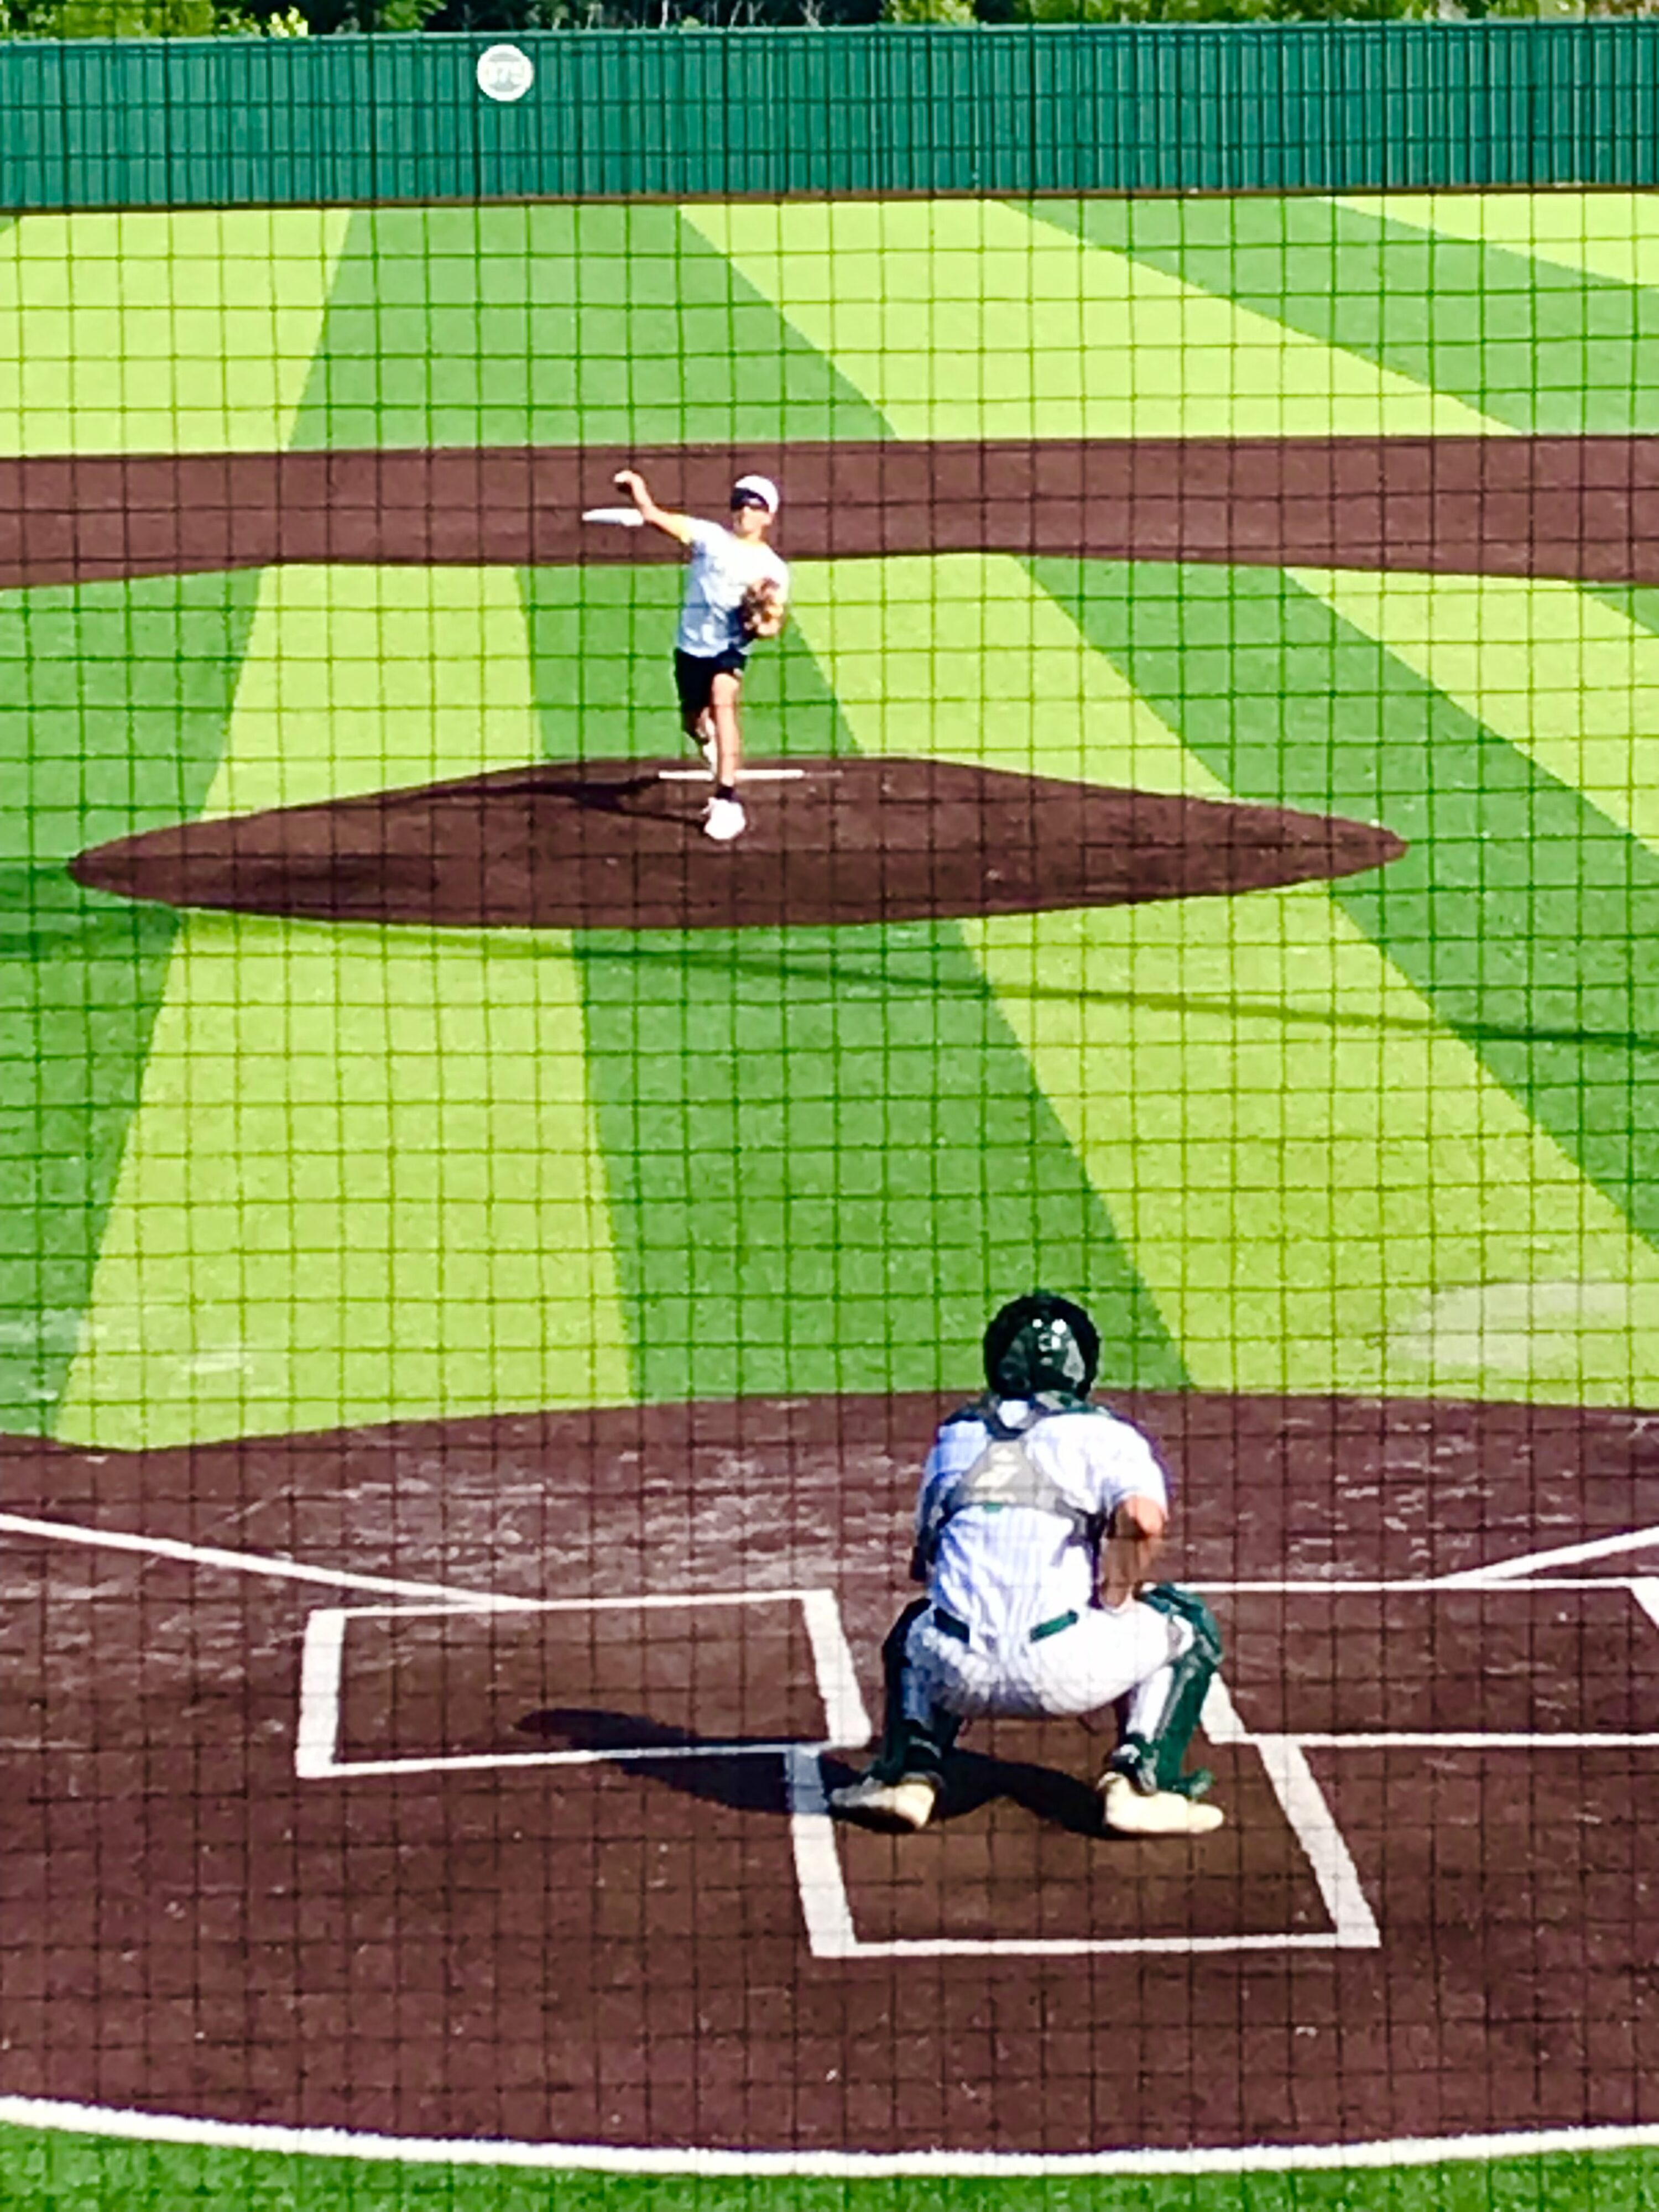 Tatum's Jett Sorenson throws out the first pitch prior to the start of Friday's UIL Class 3A, Region II Area playoff game between Winnsboro and Tatum, on Friday night in Tatum. Tatum's Eagles won, 6-3, and won the series, two games to none. (Photo by JOE HALE - ETBLITZ.COM)